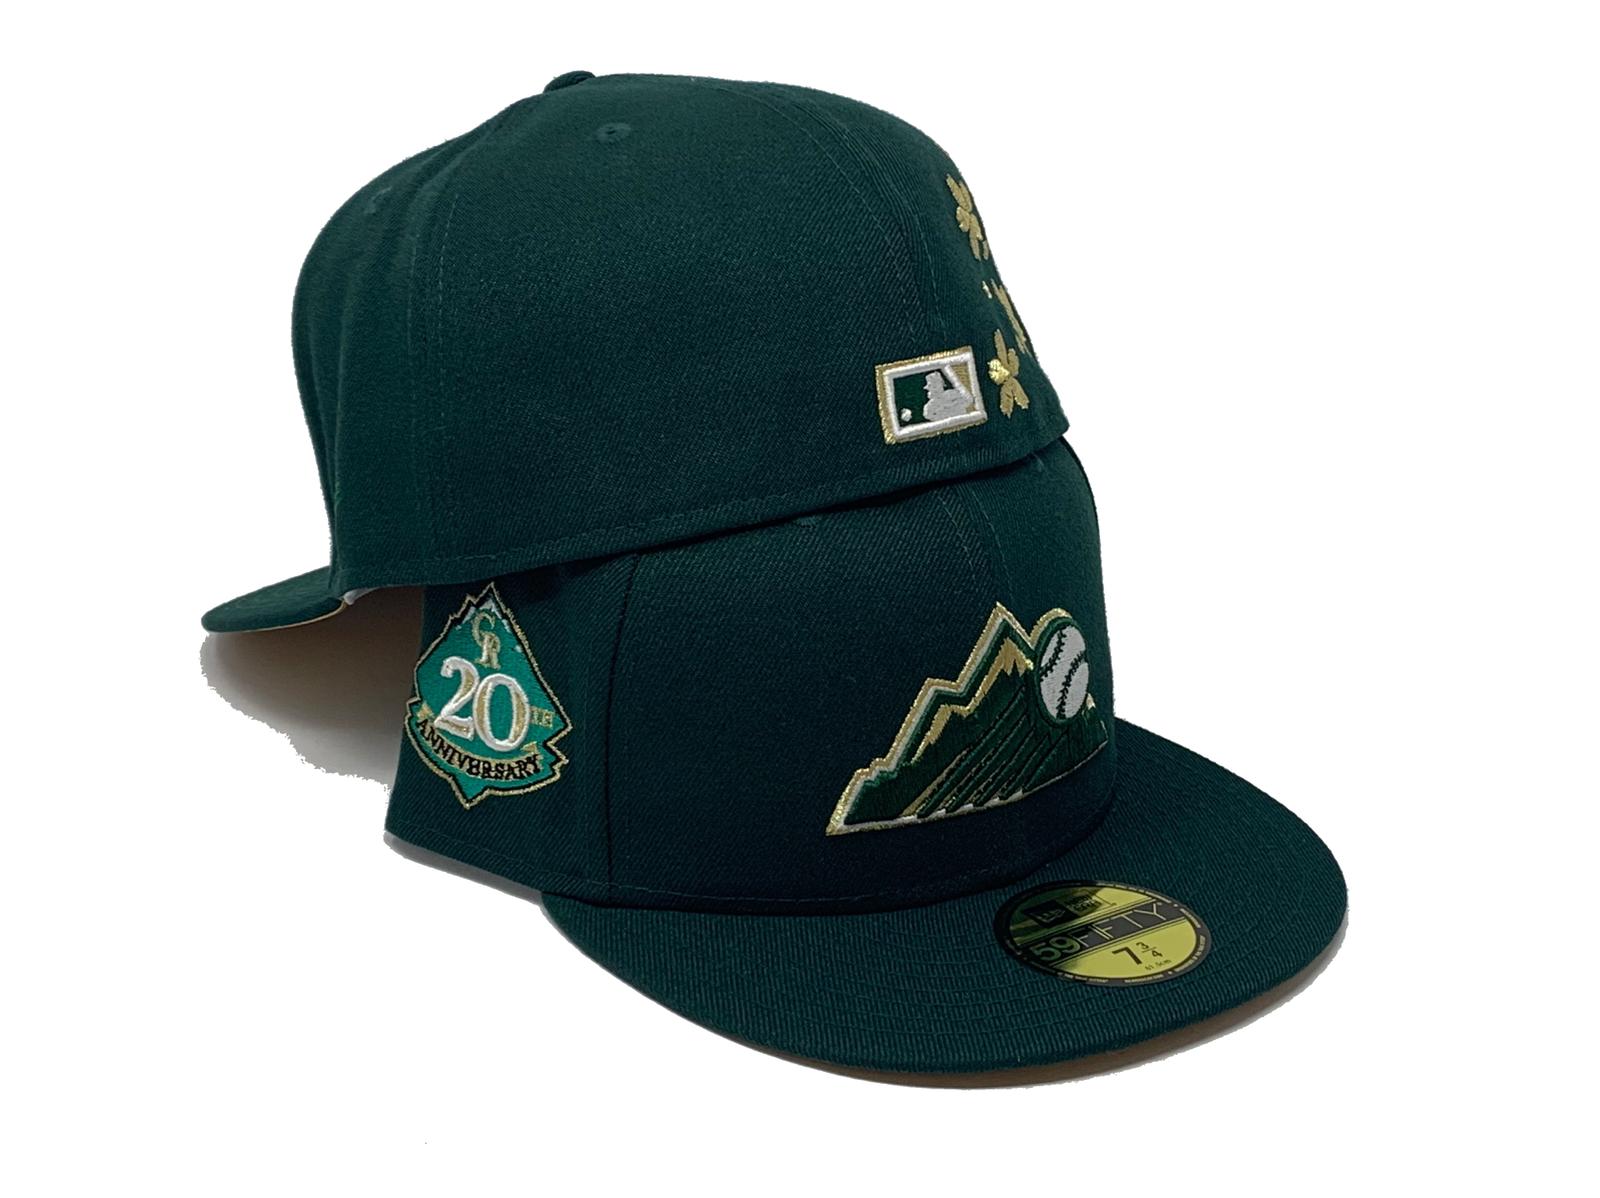 COLORADO ROCKIES 20TH ANNIVERSARY  FOREST PACK GREEN METALLIC